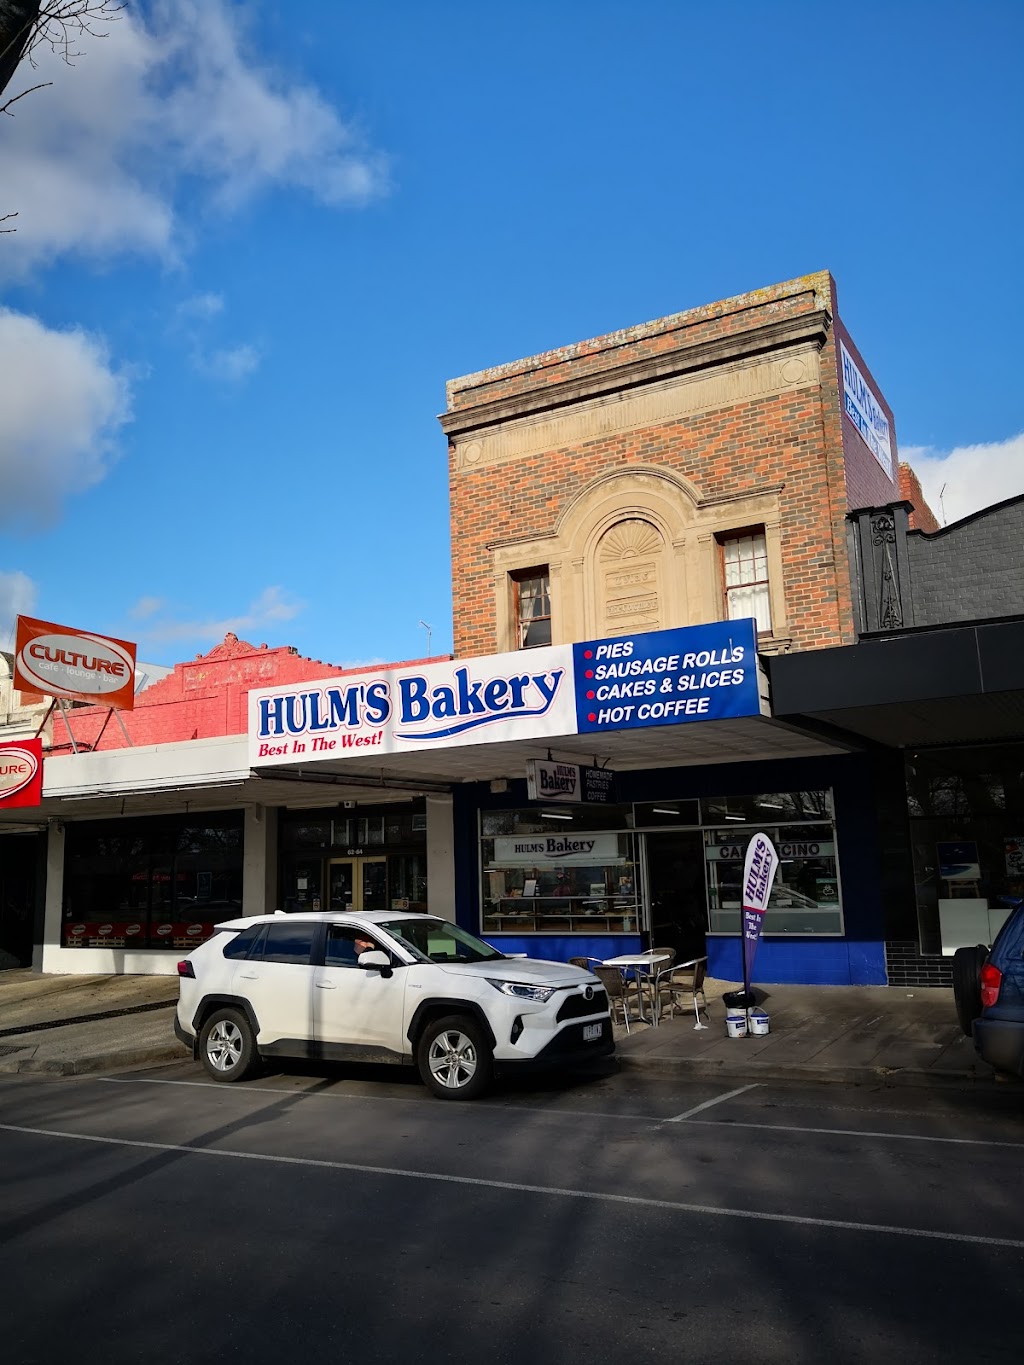 Hulms Bakery Colac | bakery | 66 Murray St, Colac VIC 3250, Australia | 0352312080 OR +61 3 5231 2080